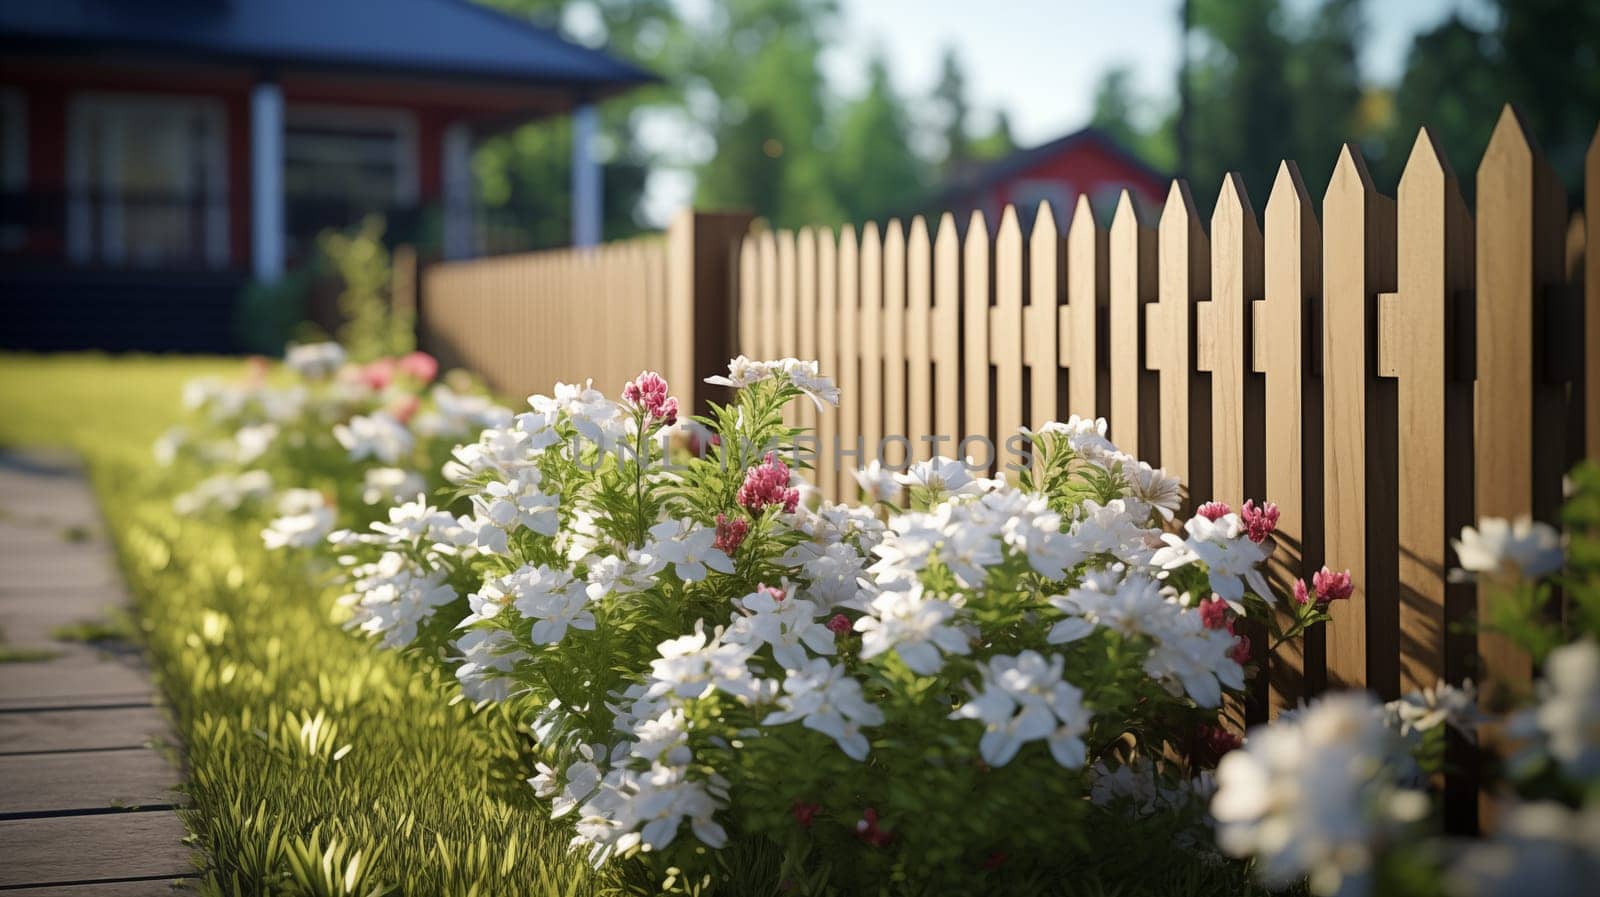 White and pink flowers blooming along a wooden picket fence in a suburban setting with a house in the background.